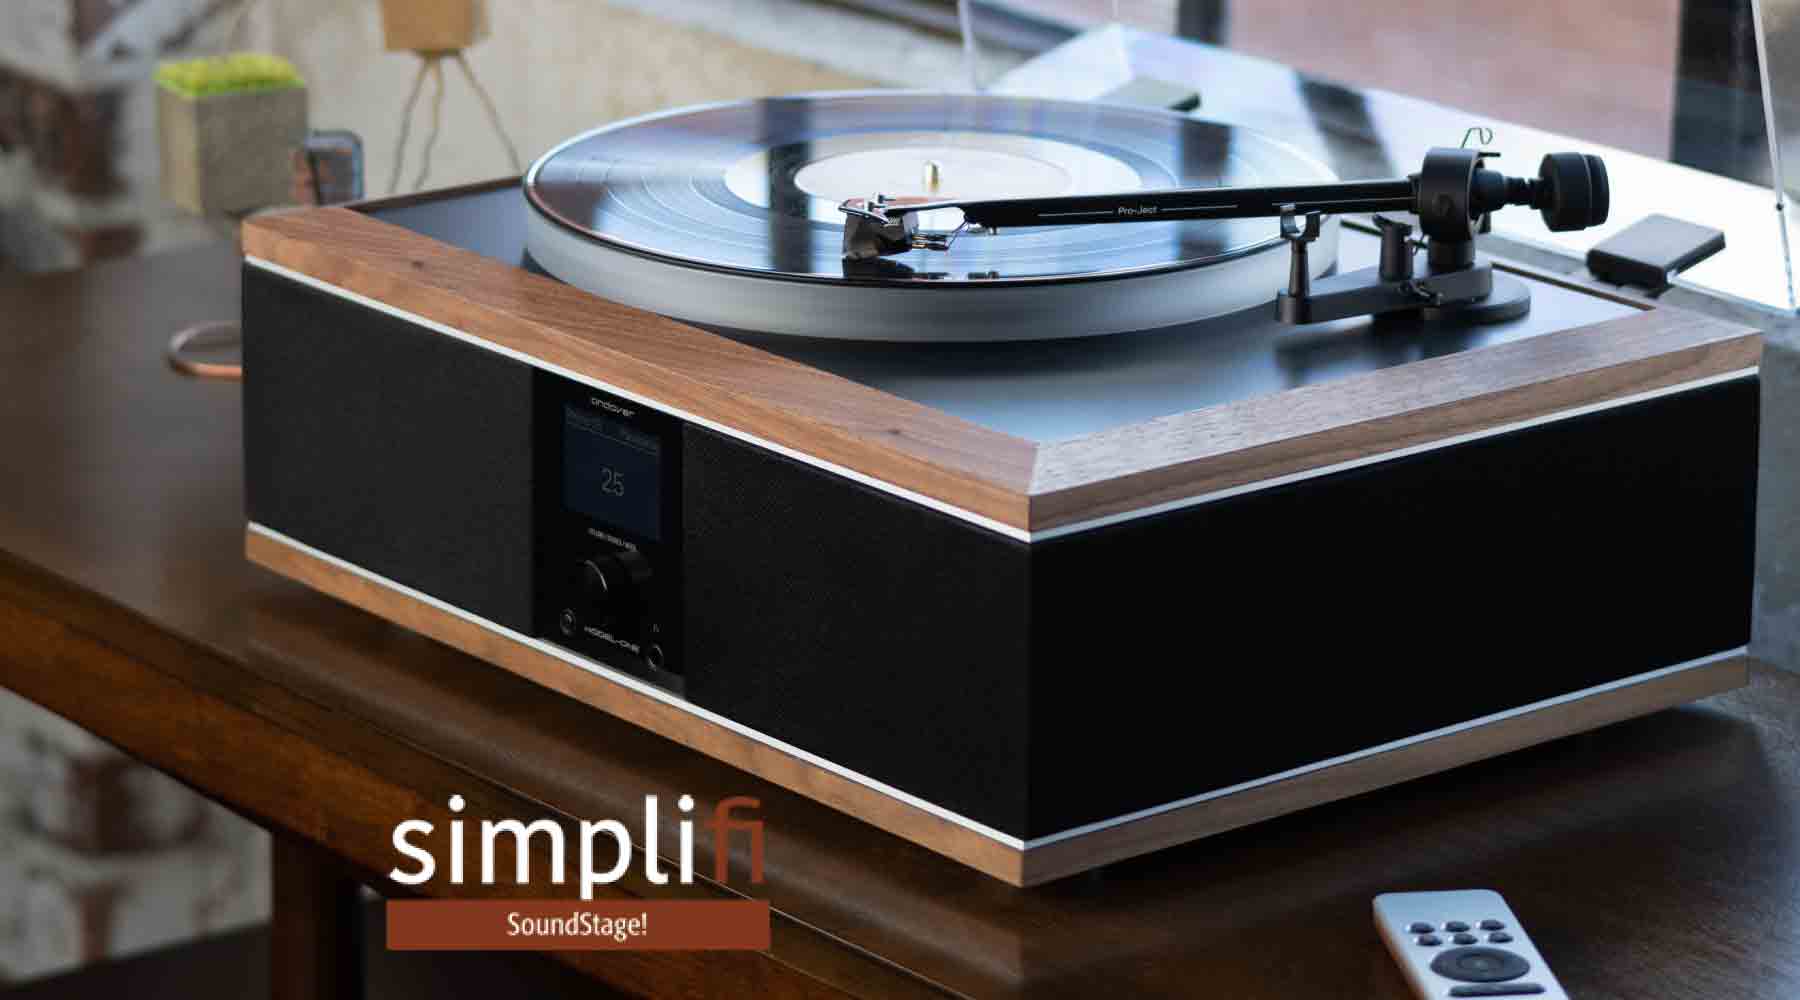 Model-One Review by SoundStage! Simpifi